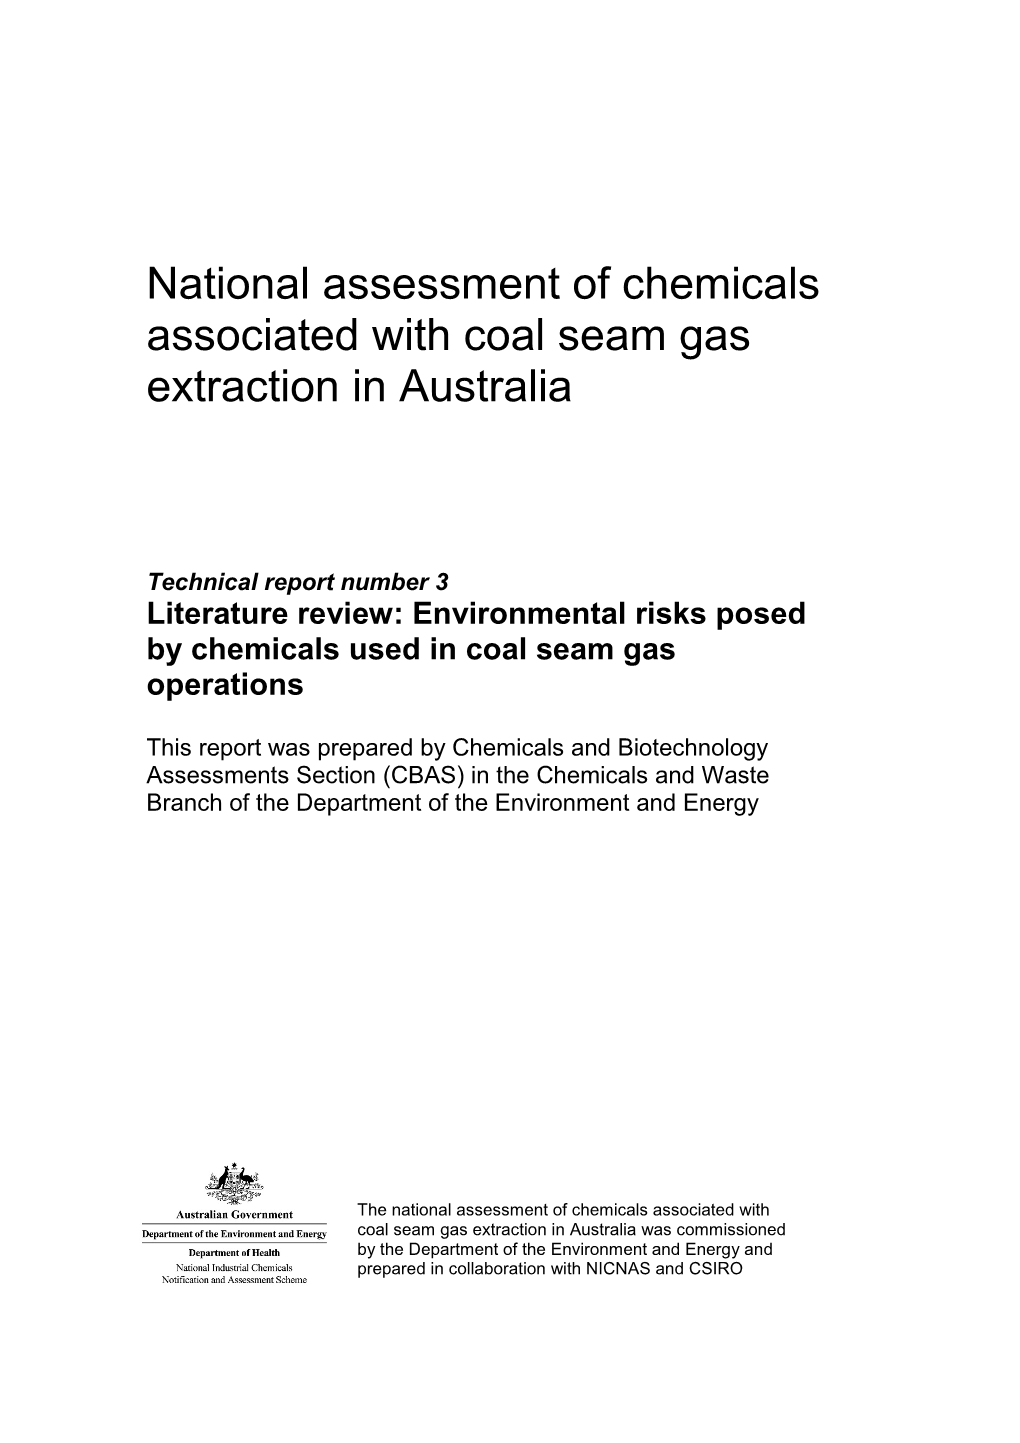 Technical Report Number 3 Literature Review: Environmental Risks Posed by Chemicals Used in Coal Seam Gas Operations